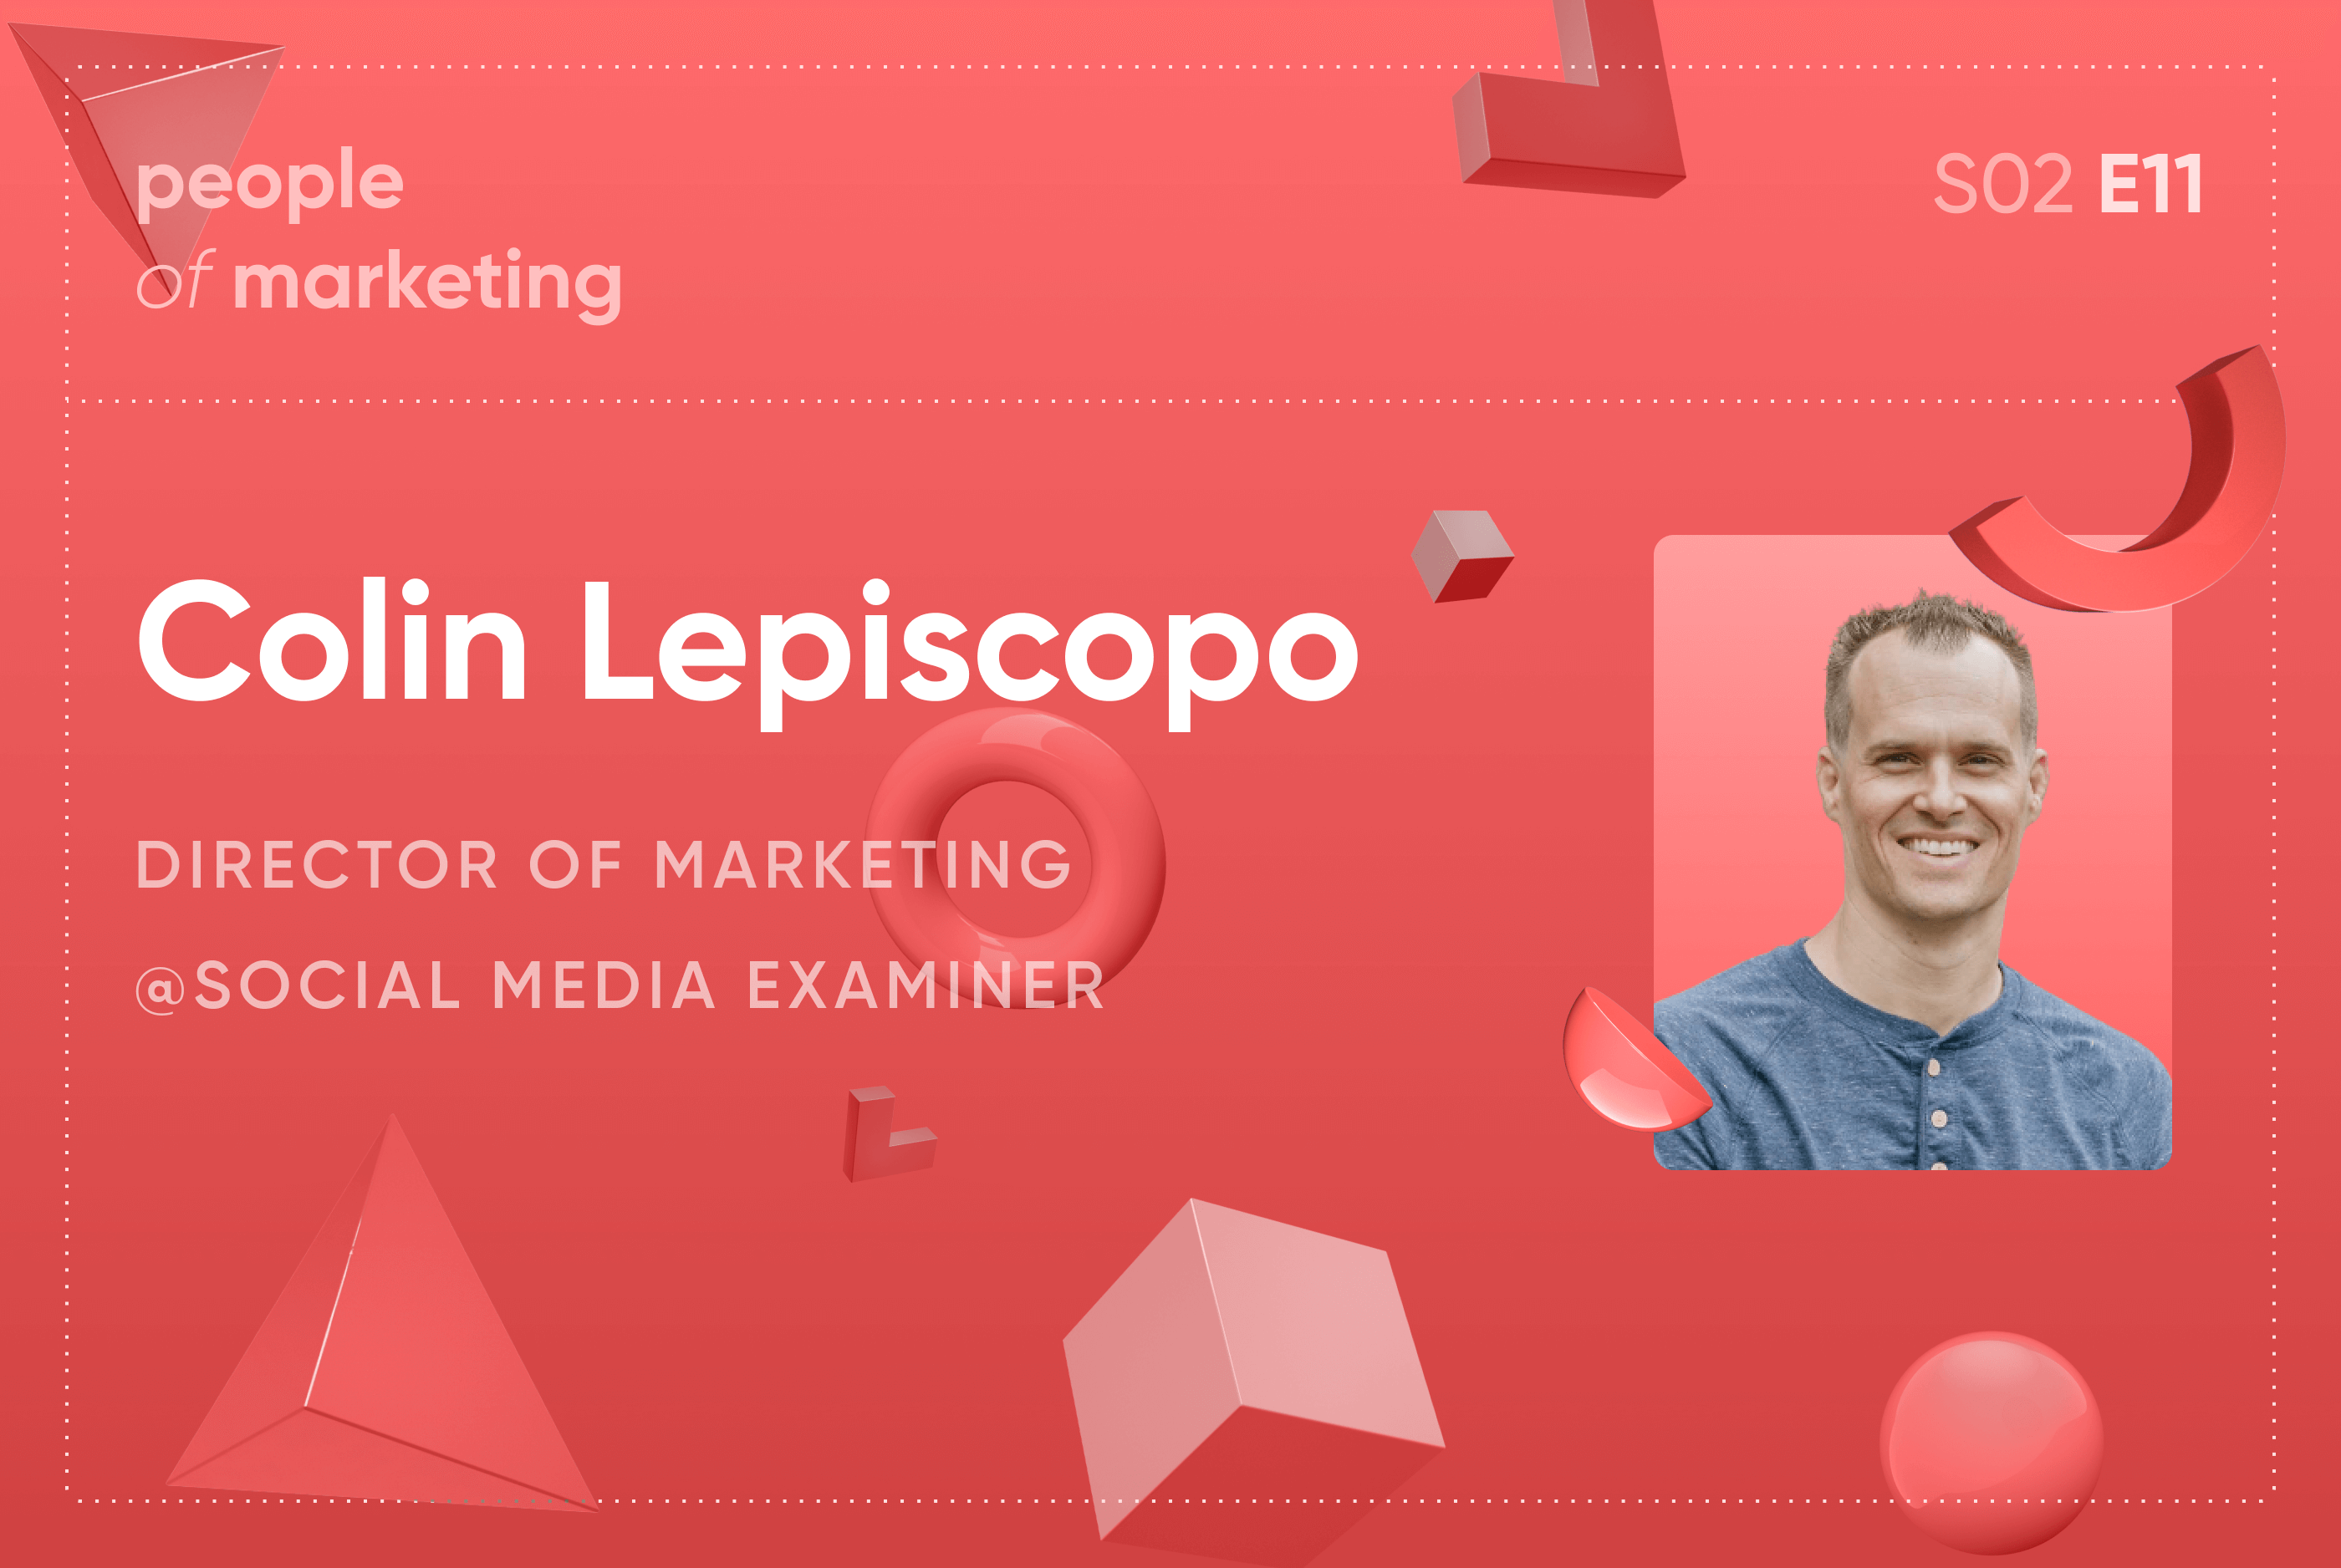 colin lepiscopo people of marketing